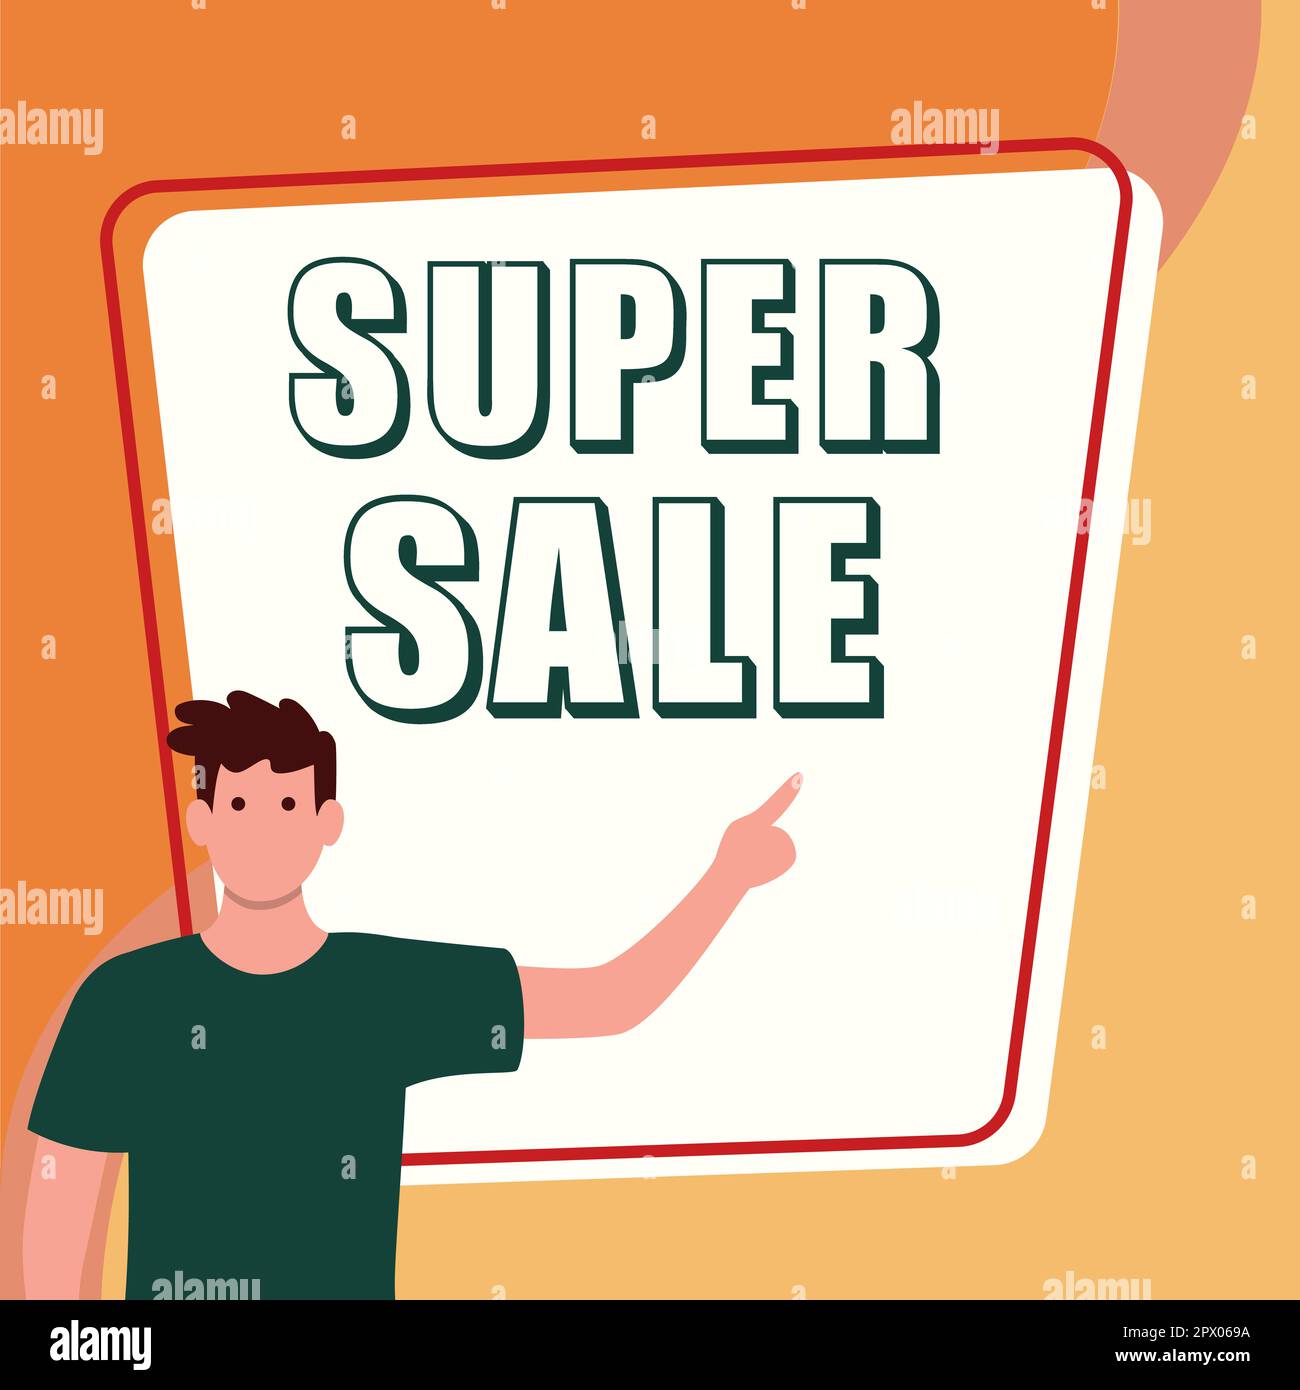 Inspiration showing sign Super Sale, Business overview offering exceptional discounts on selected products and services Stock Photo